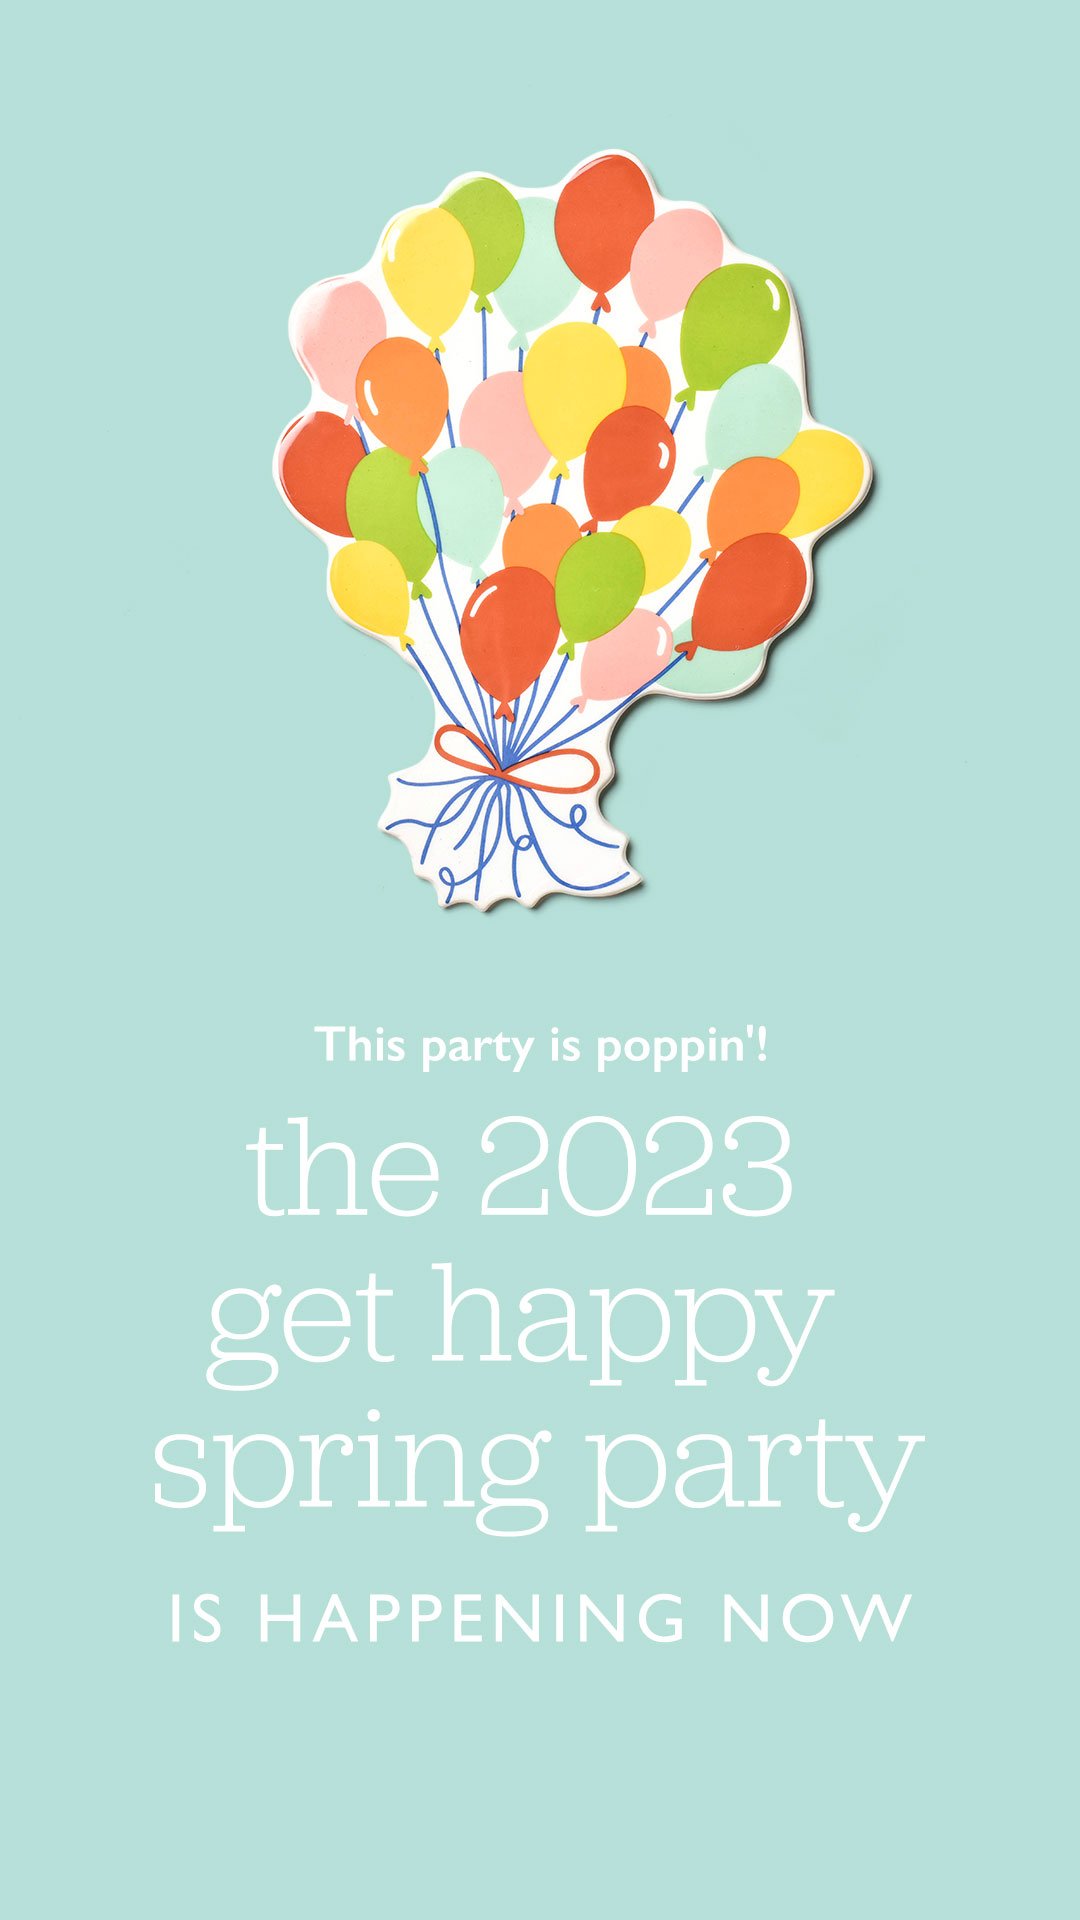 2023 - CAM - HEV_Social_Get Happy Spring Party_Happening Now_Limited Edition Attachment Image.jpg